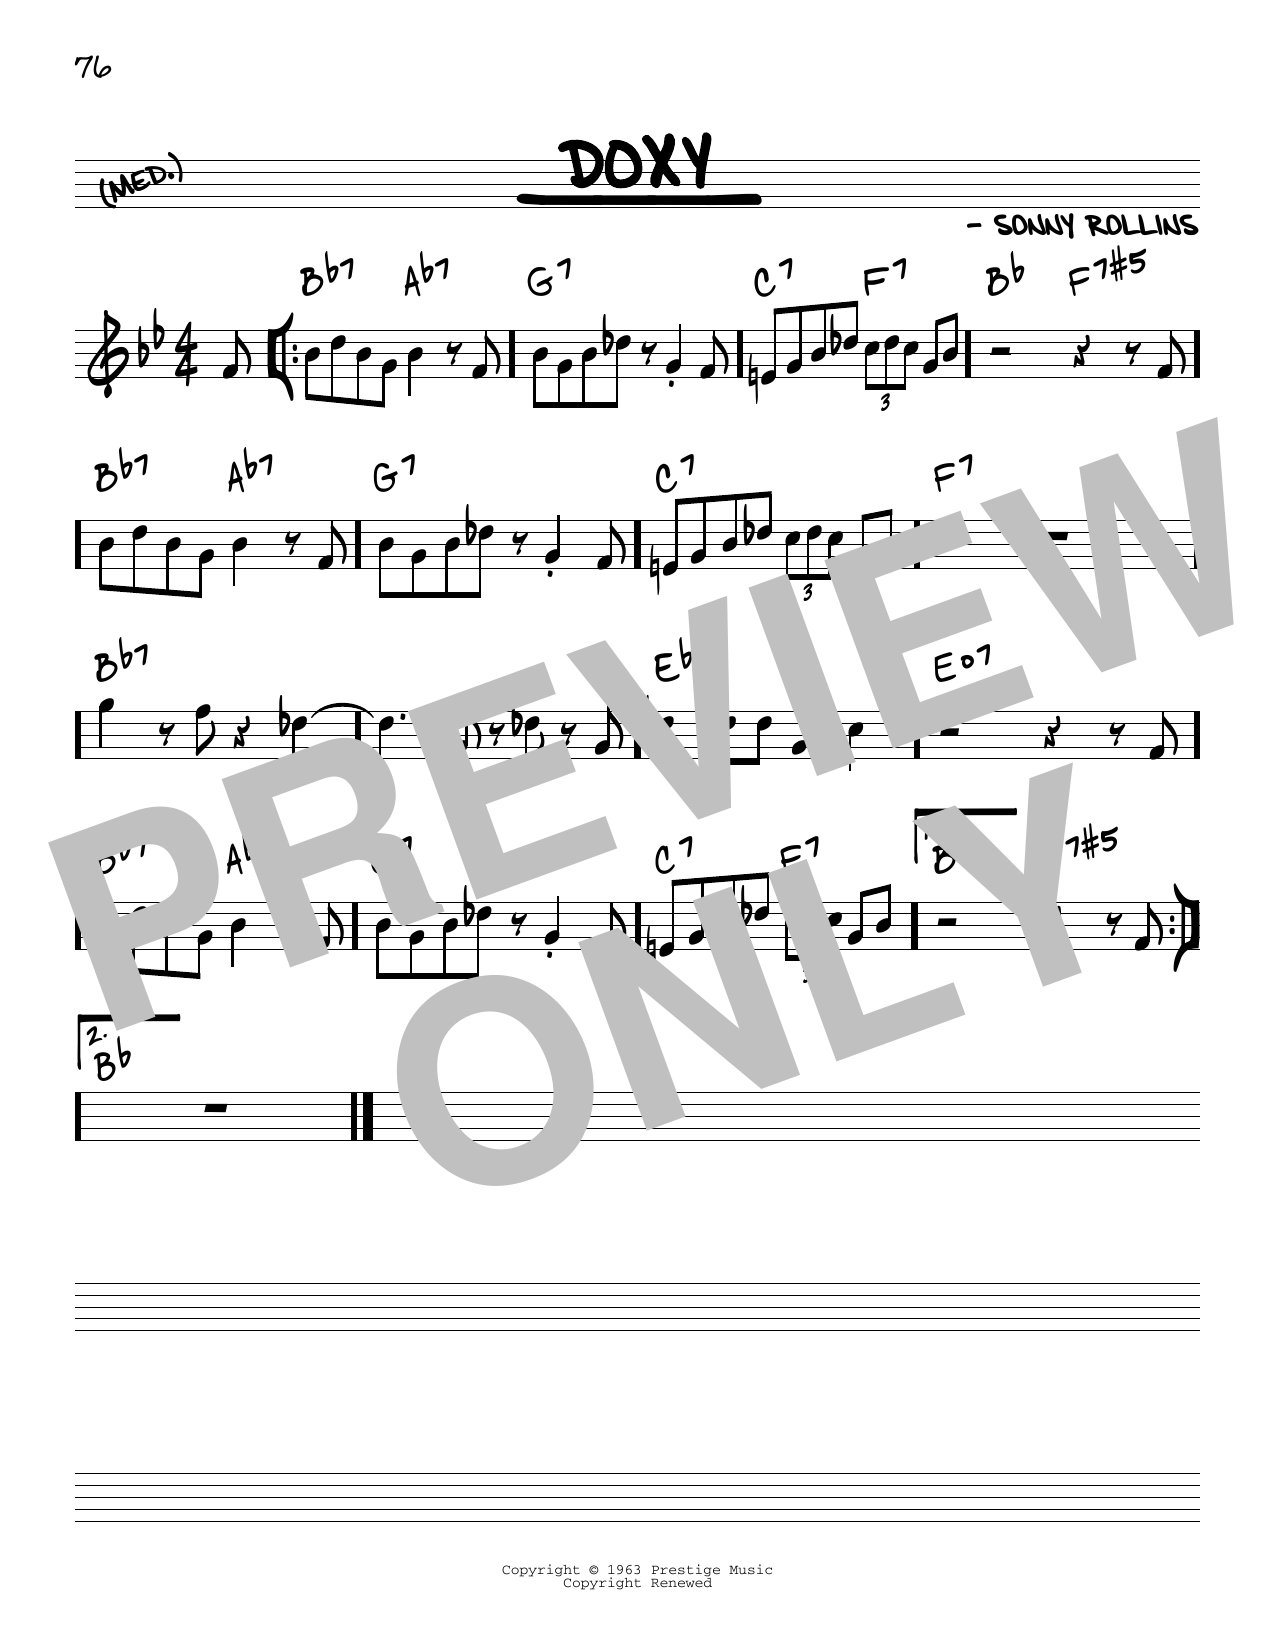 Download Sonny Rollins Doxy Sheet Music